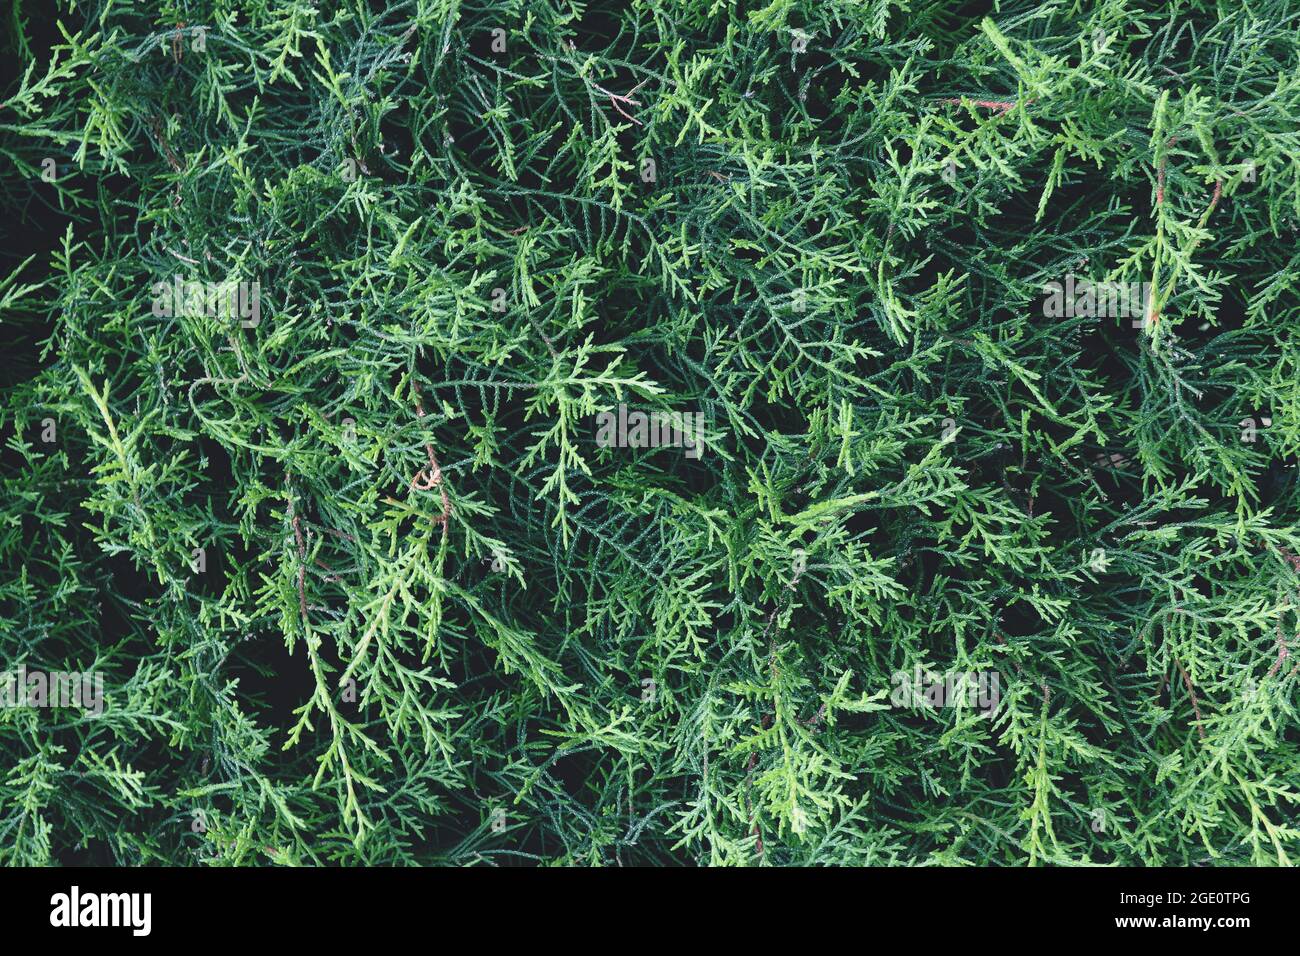 Green foliage of thuja tree in close up in summer garden. Green plant in macro style. Stock Photo